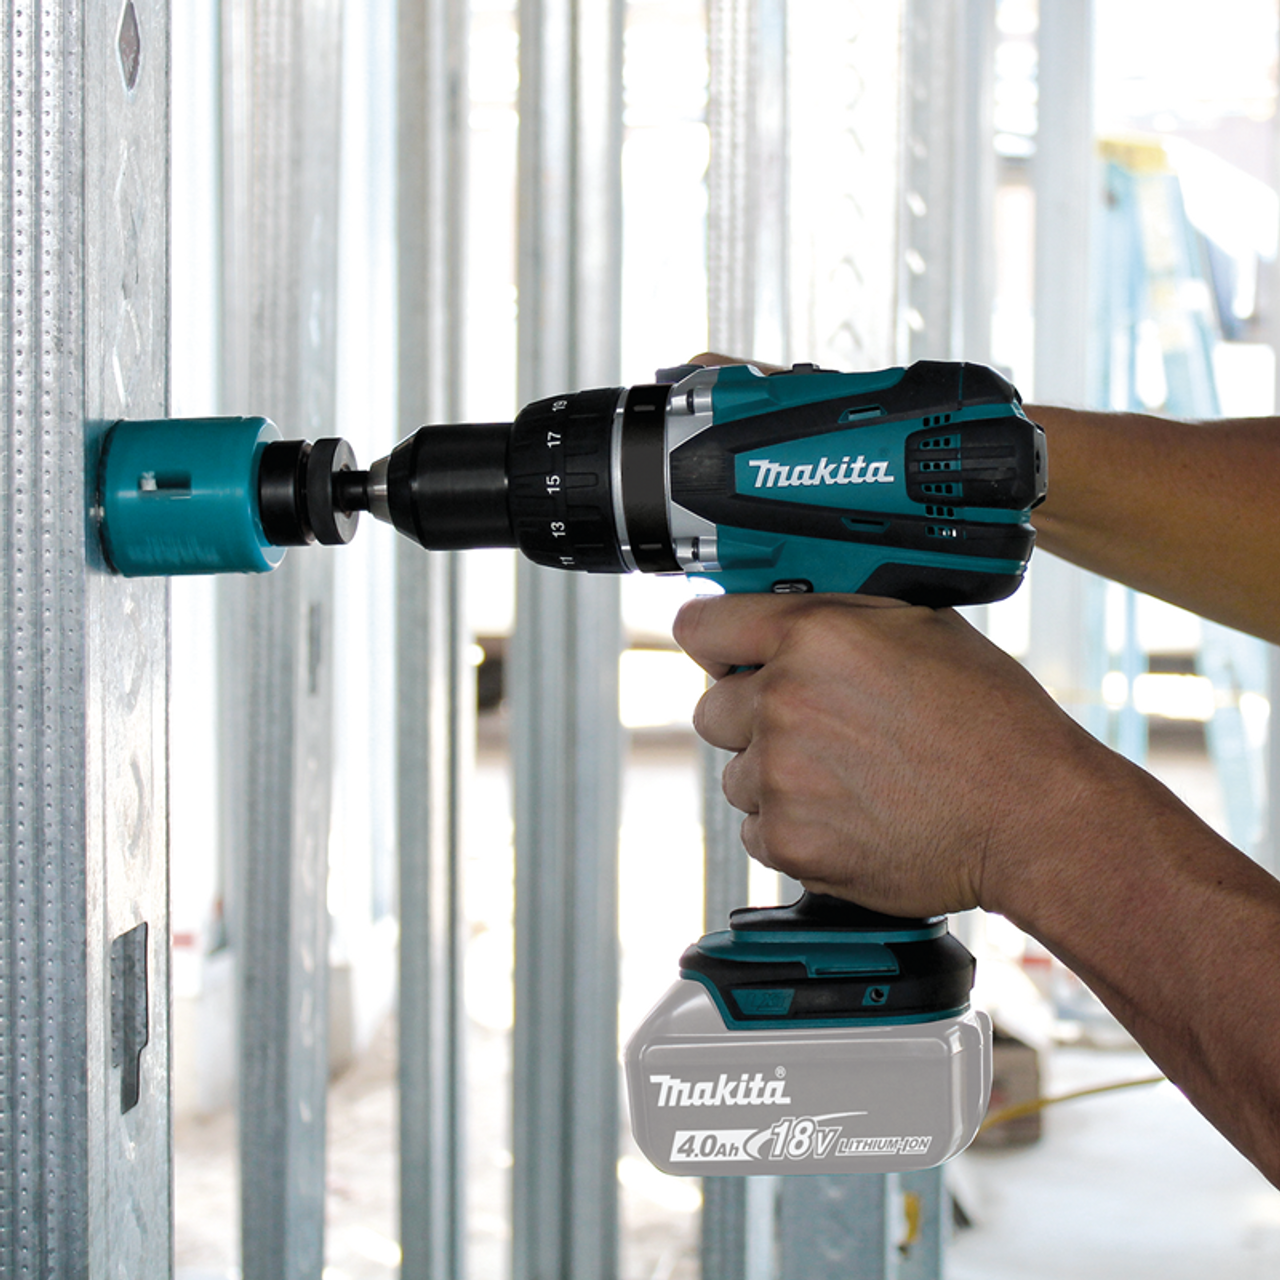 18V LXT? Lithium-Ion Cordless 1/2" Driver-Drill, Tool Only, Makita-built 4-pole motor, XFD03Z